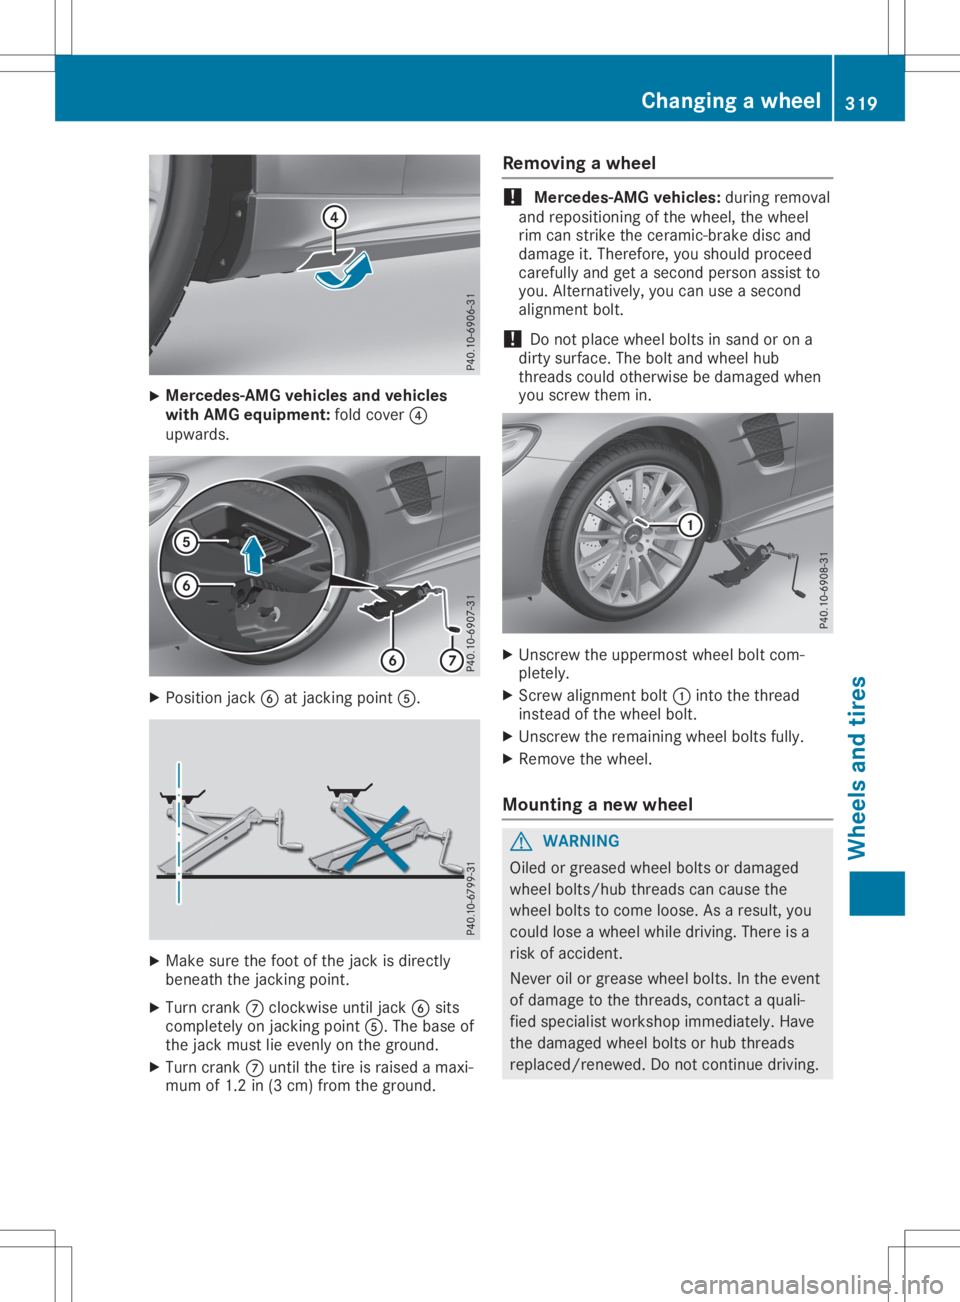 MERCEDES-BENZ SL CLASS 2020  Owners Manual X
Merce
des-AMGvehic lesand vehic les
with AMG equipment: foldcover 0085
upw ards. X
Posi tion jack 0084atjacking point0083. X
Make surethefoot ofthe jack isdirectly
benea ththe jacking point.
X Turn 